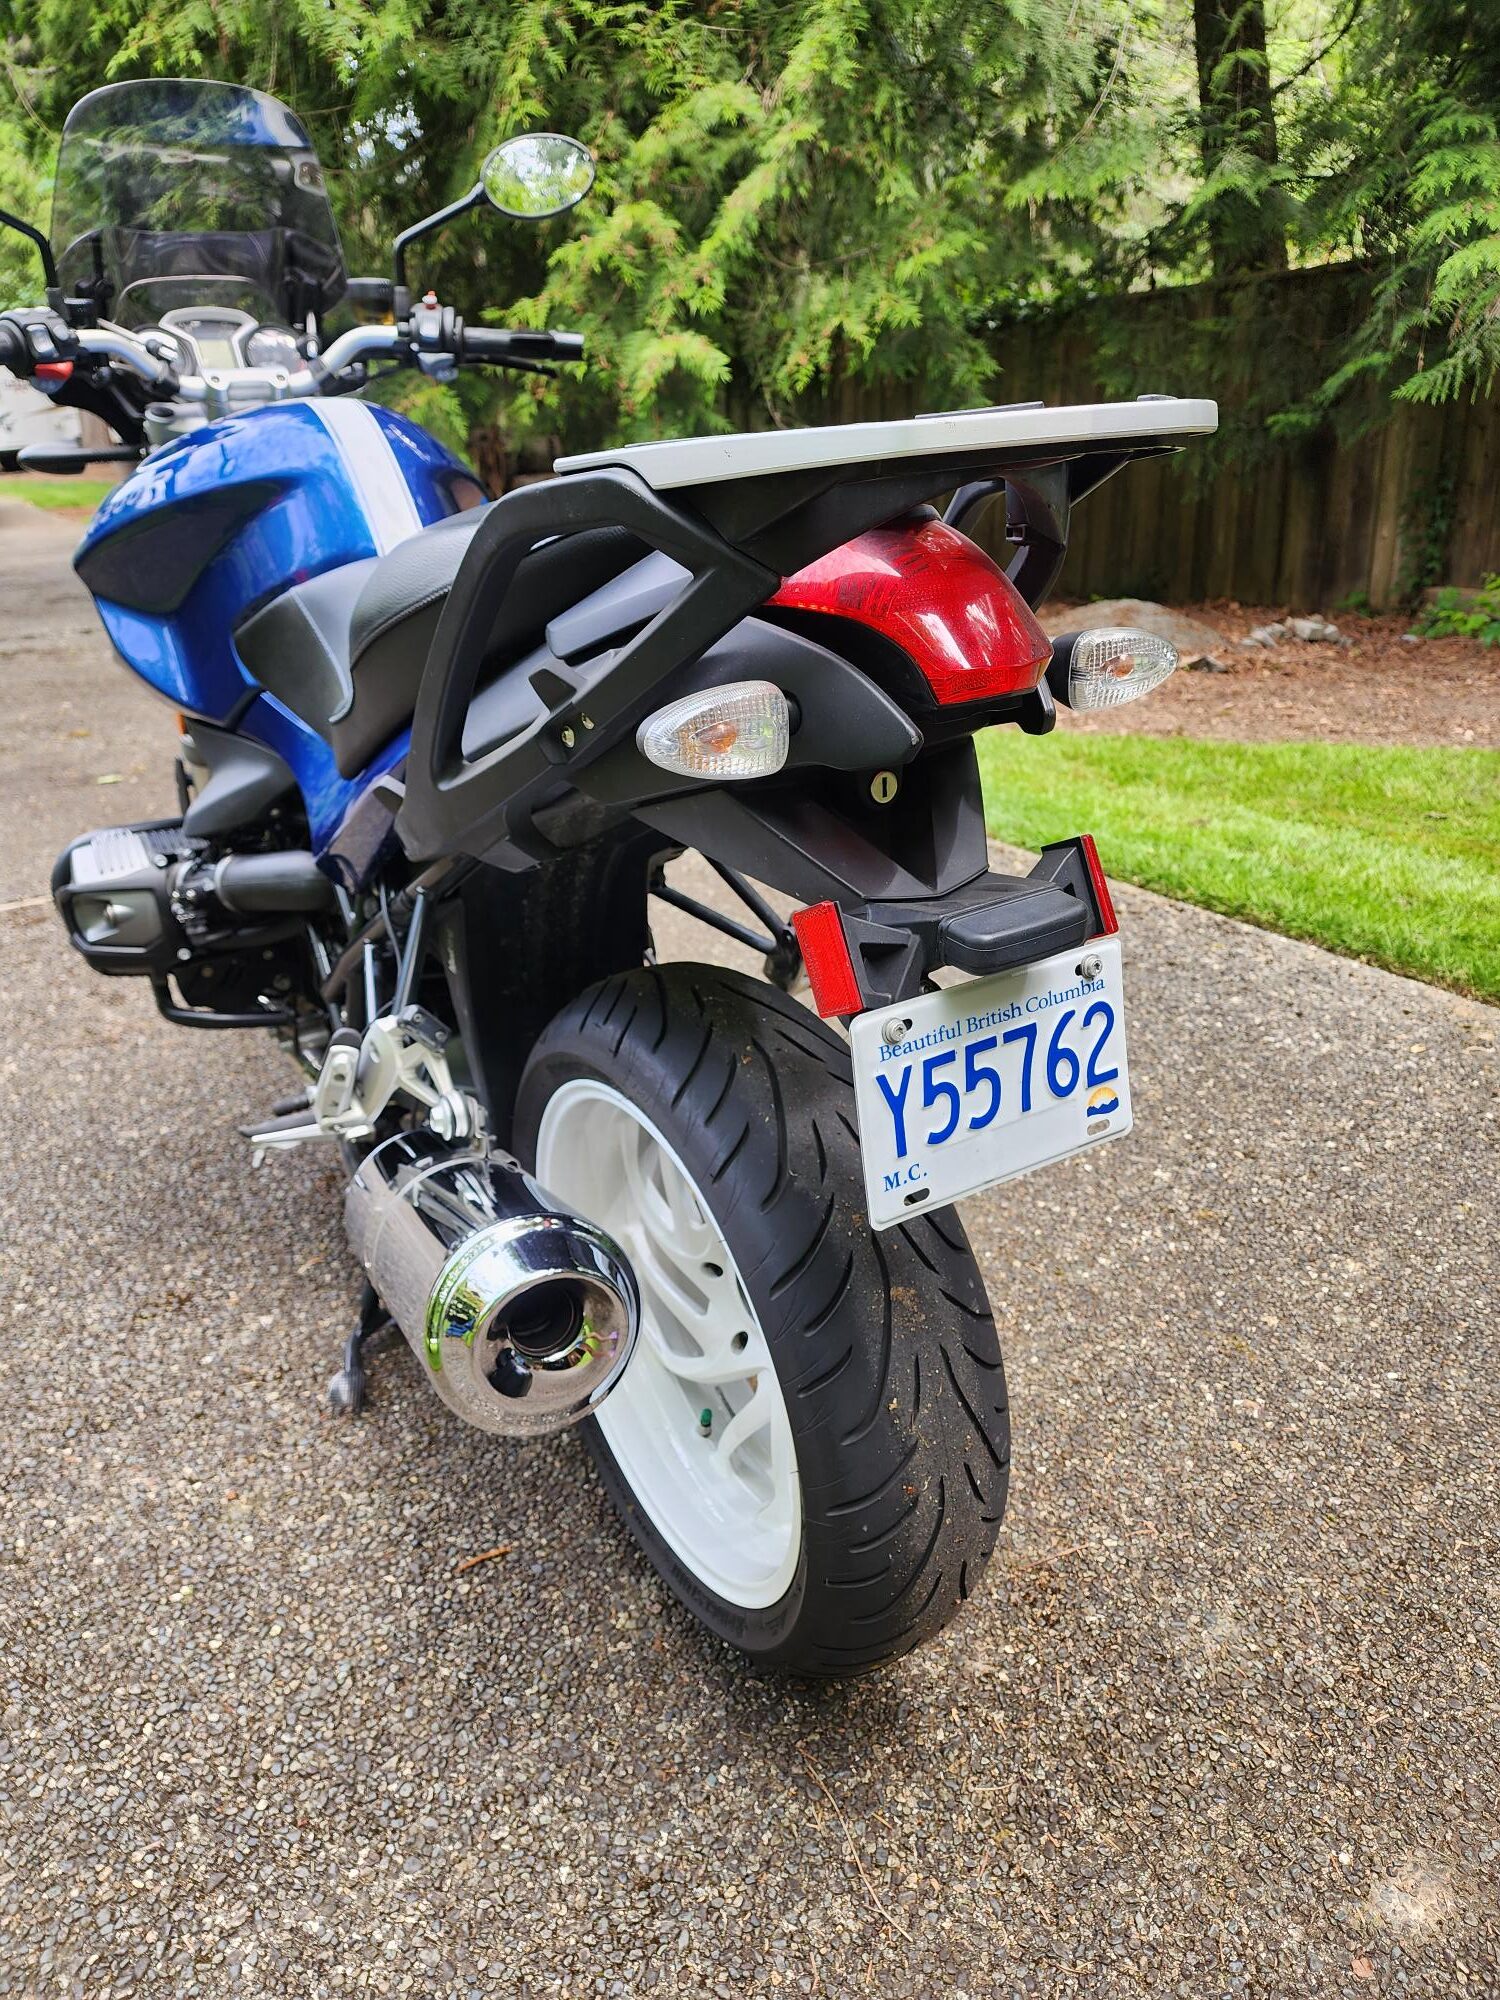 Read more about the article 2014 BMW R1200R For Sale $7500